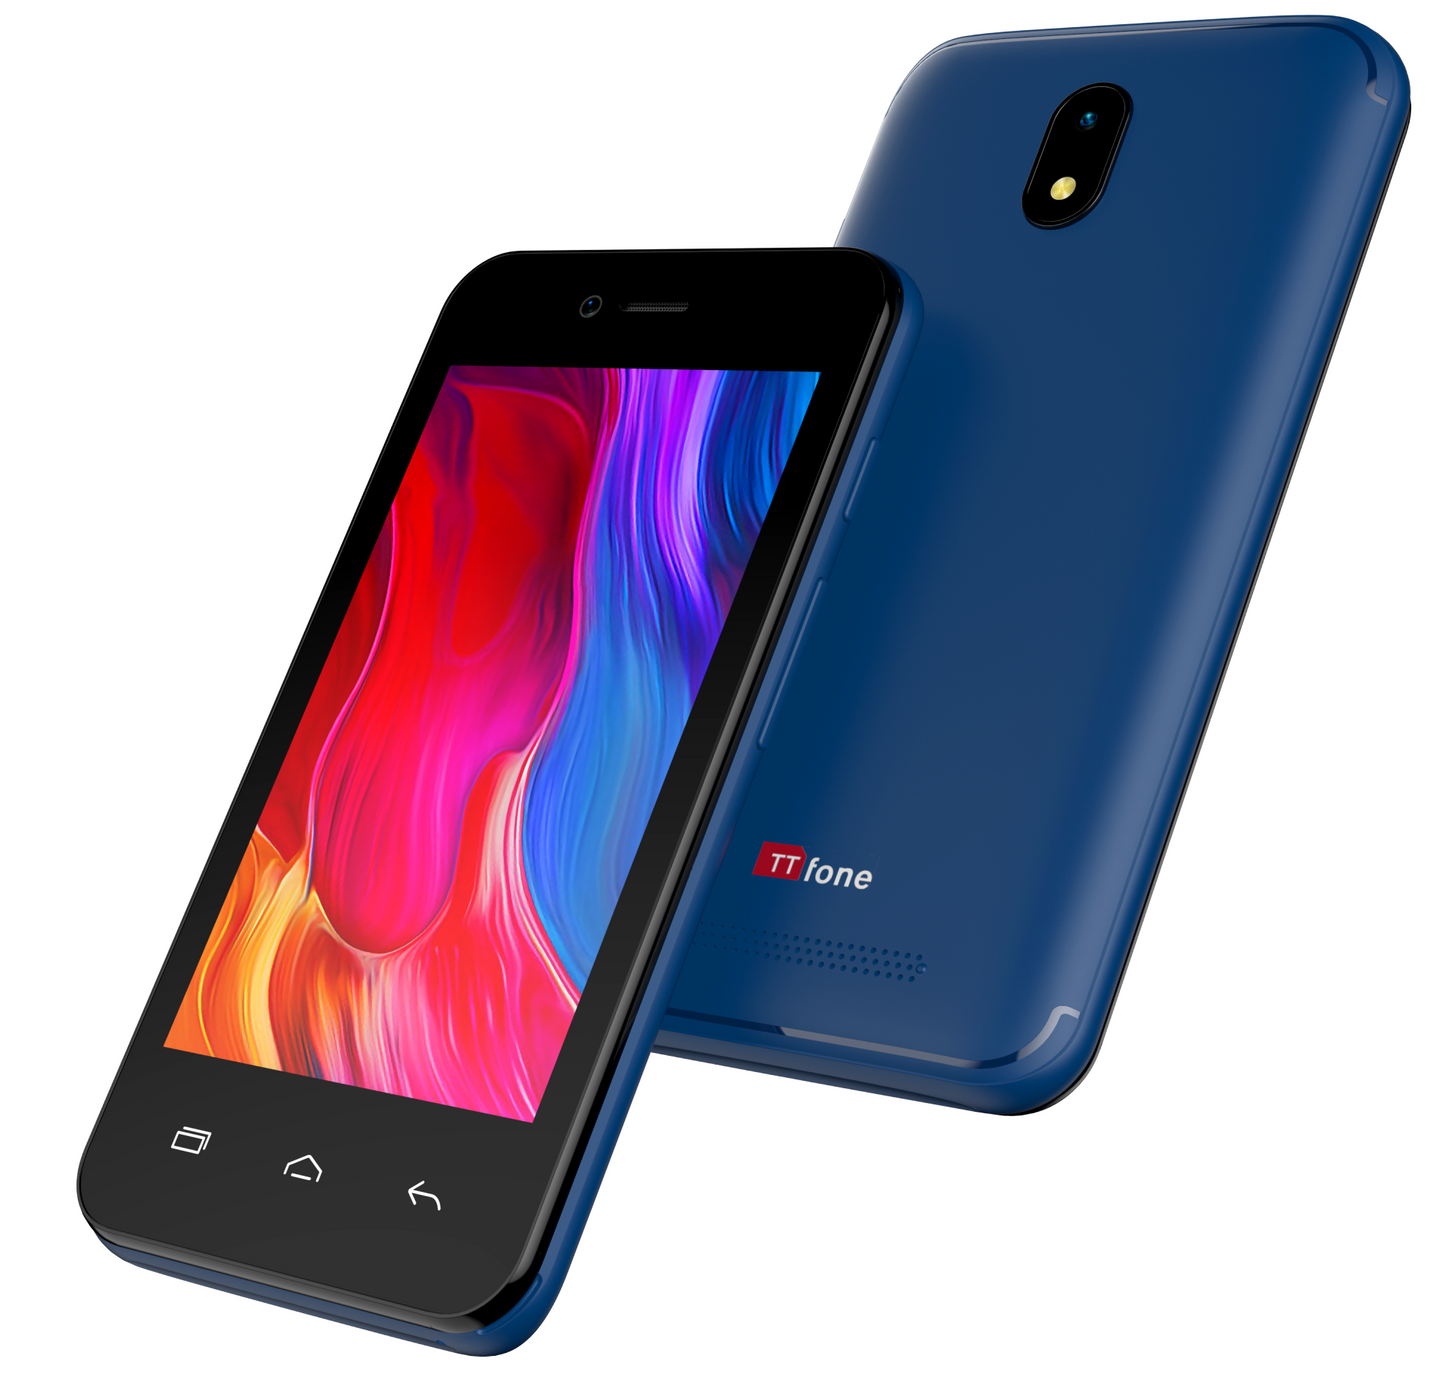 TTfone Blue TT20 Dual SIM - Warehouse Deals with USB Cable and EE Pay As You Go Sim Card